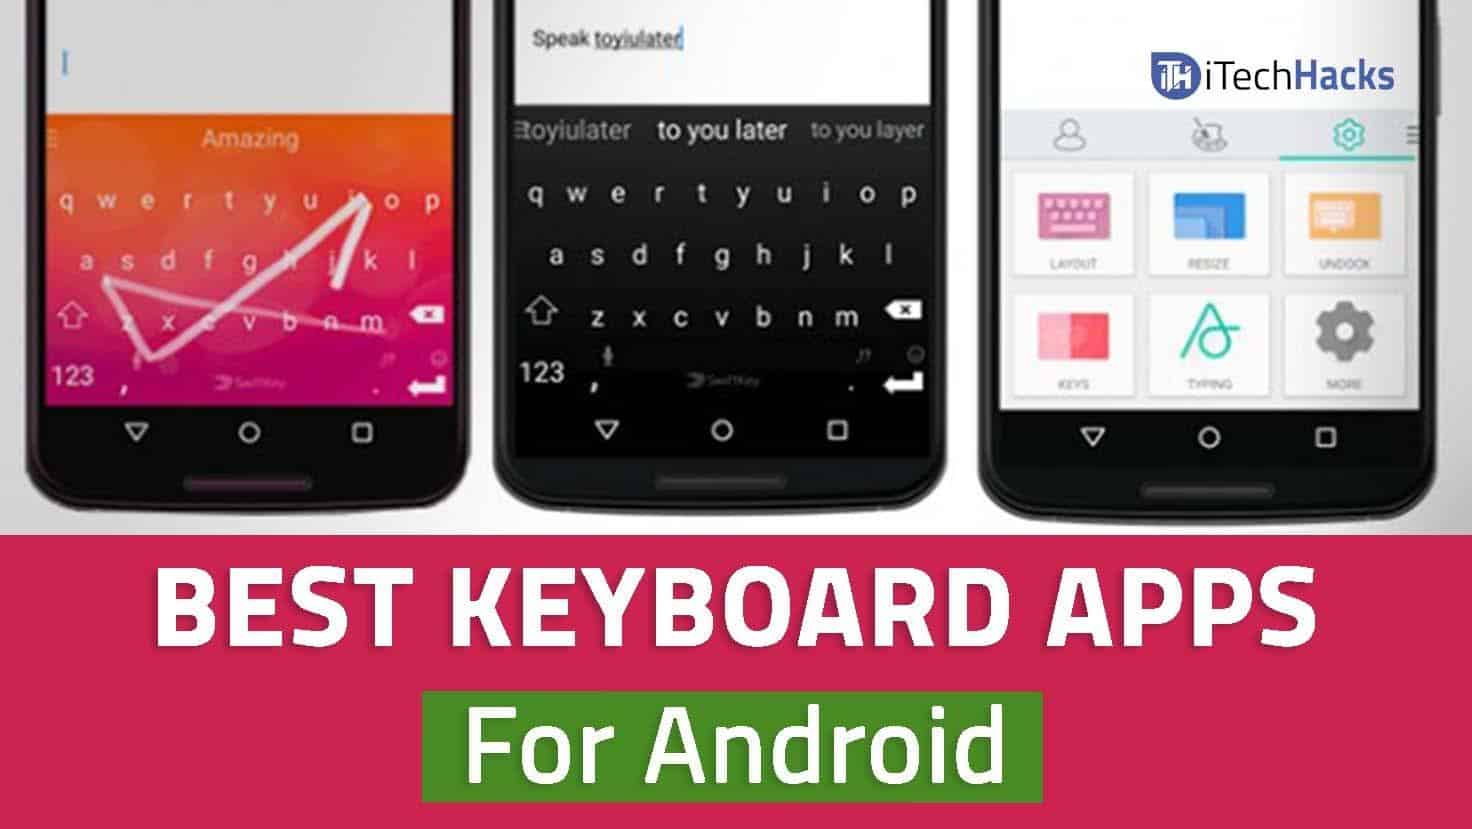 Best keyboard apps for Android